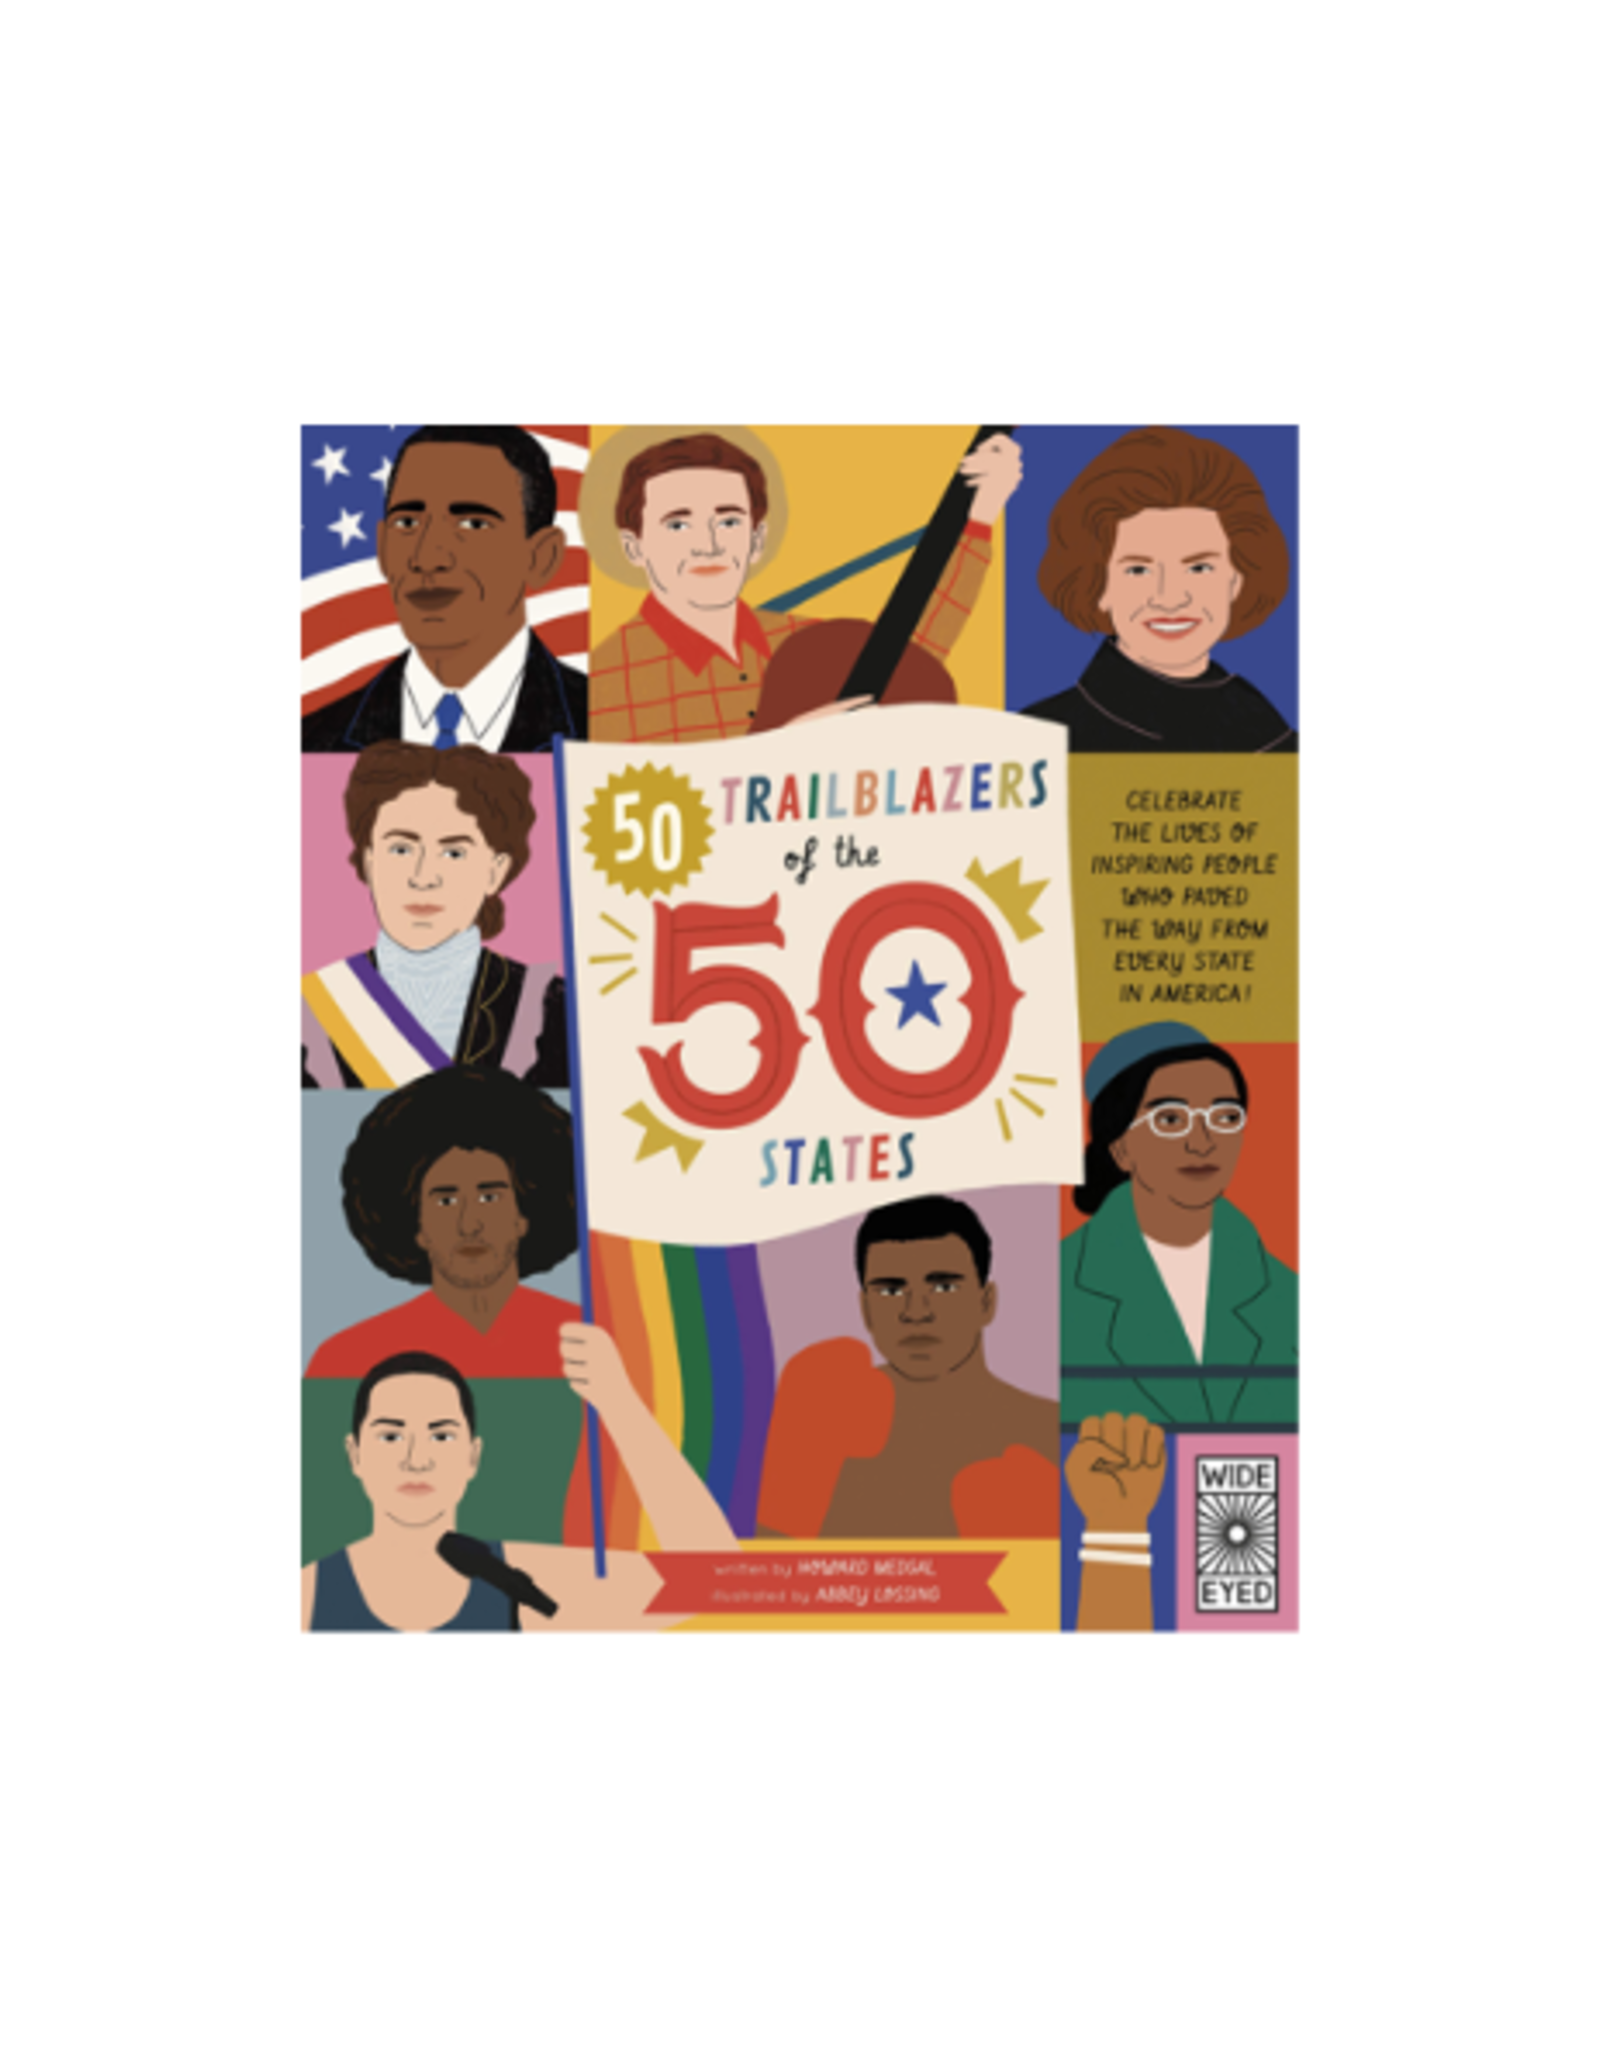 50 Trailblazers of the 50 States by: Howard Megdal